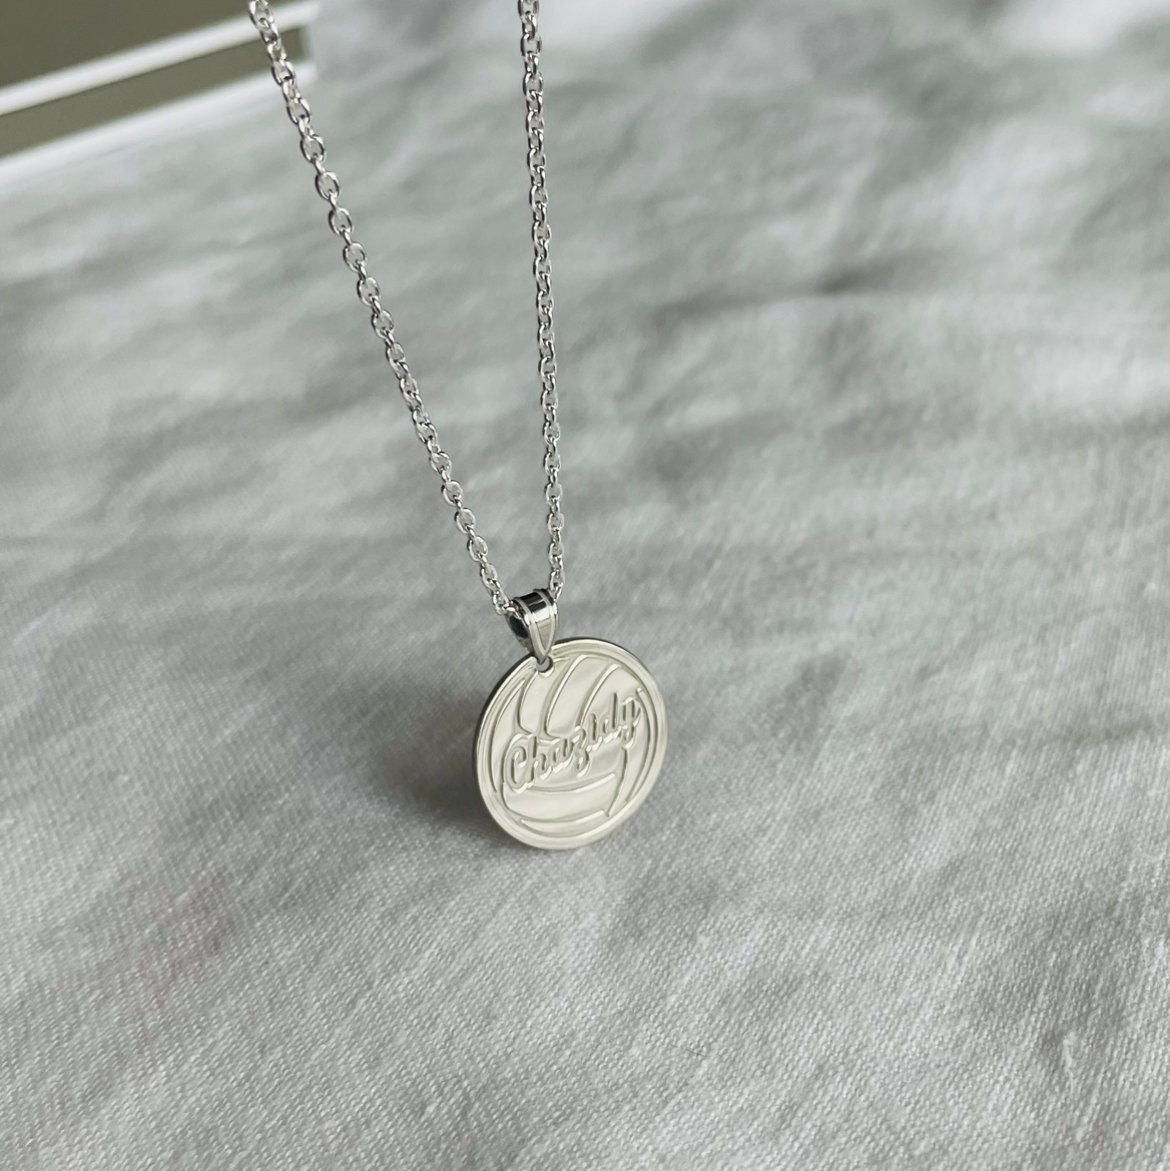 Personalized Volleyball Pendant w/ Name & Necklace included  in Sterling Silver , Gold Plated or 10k Gold Laser Engraved - Gift Box Included